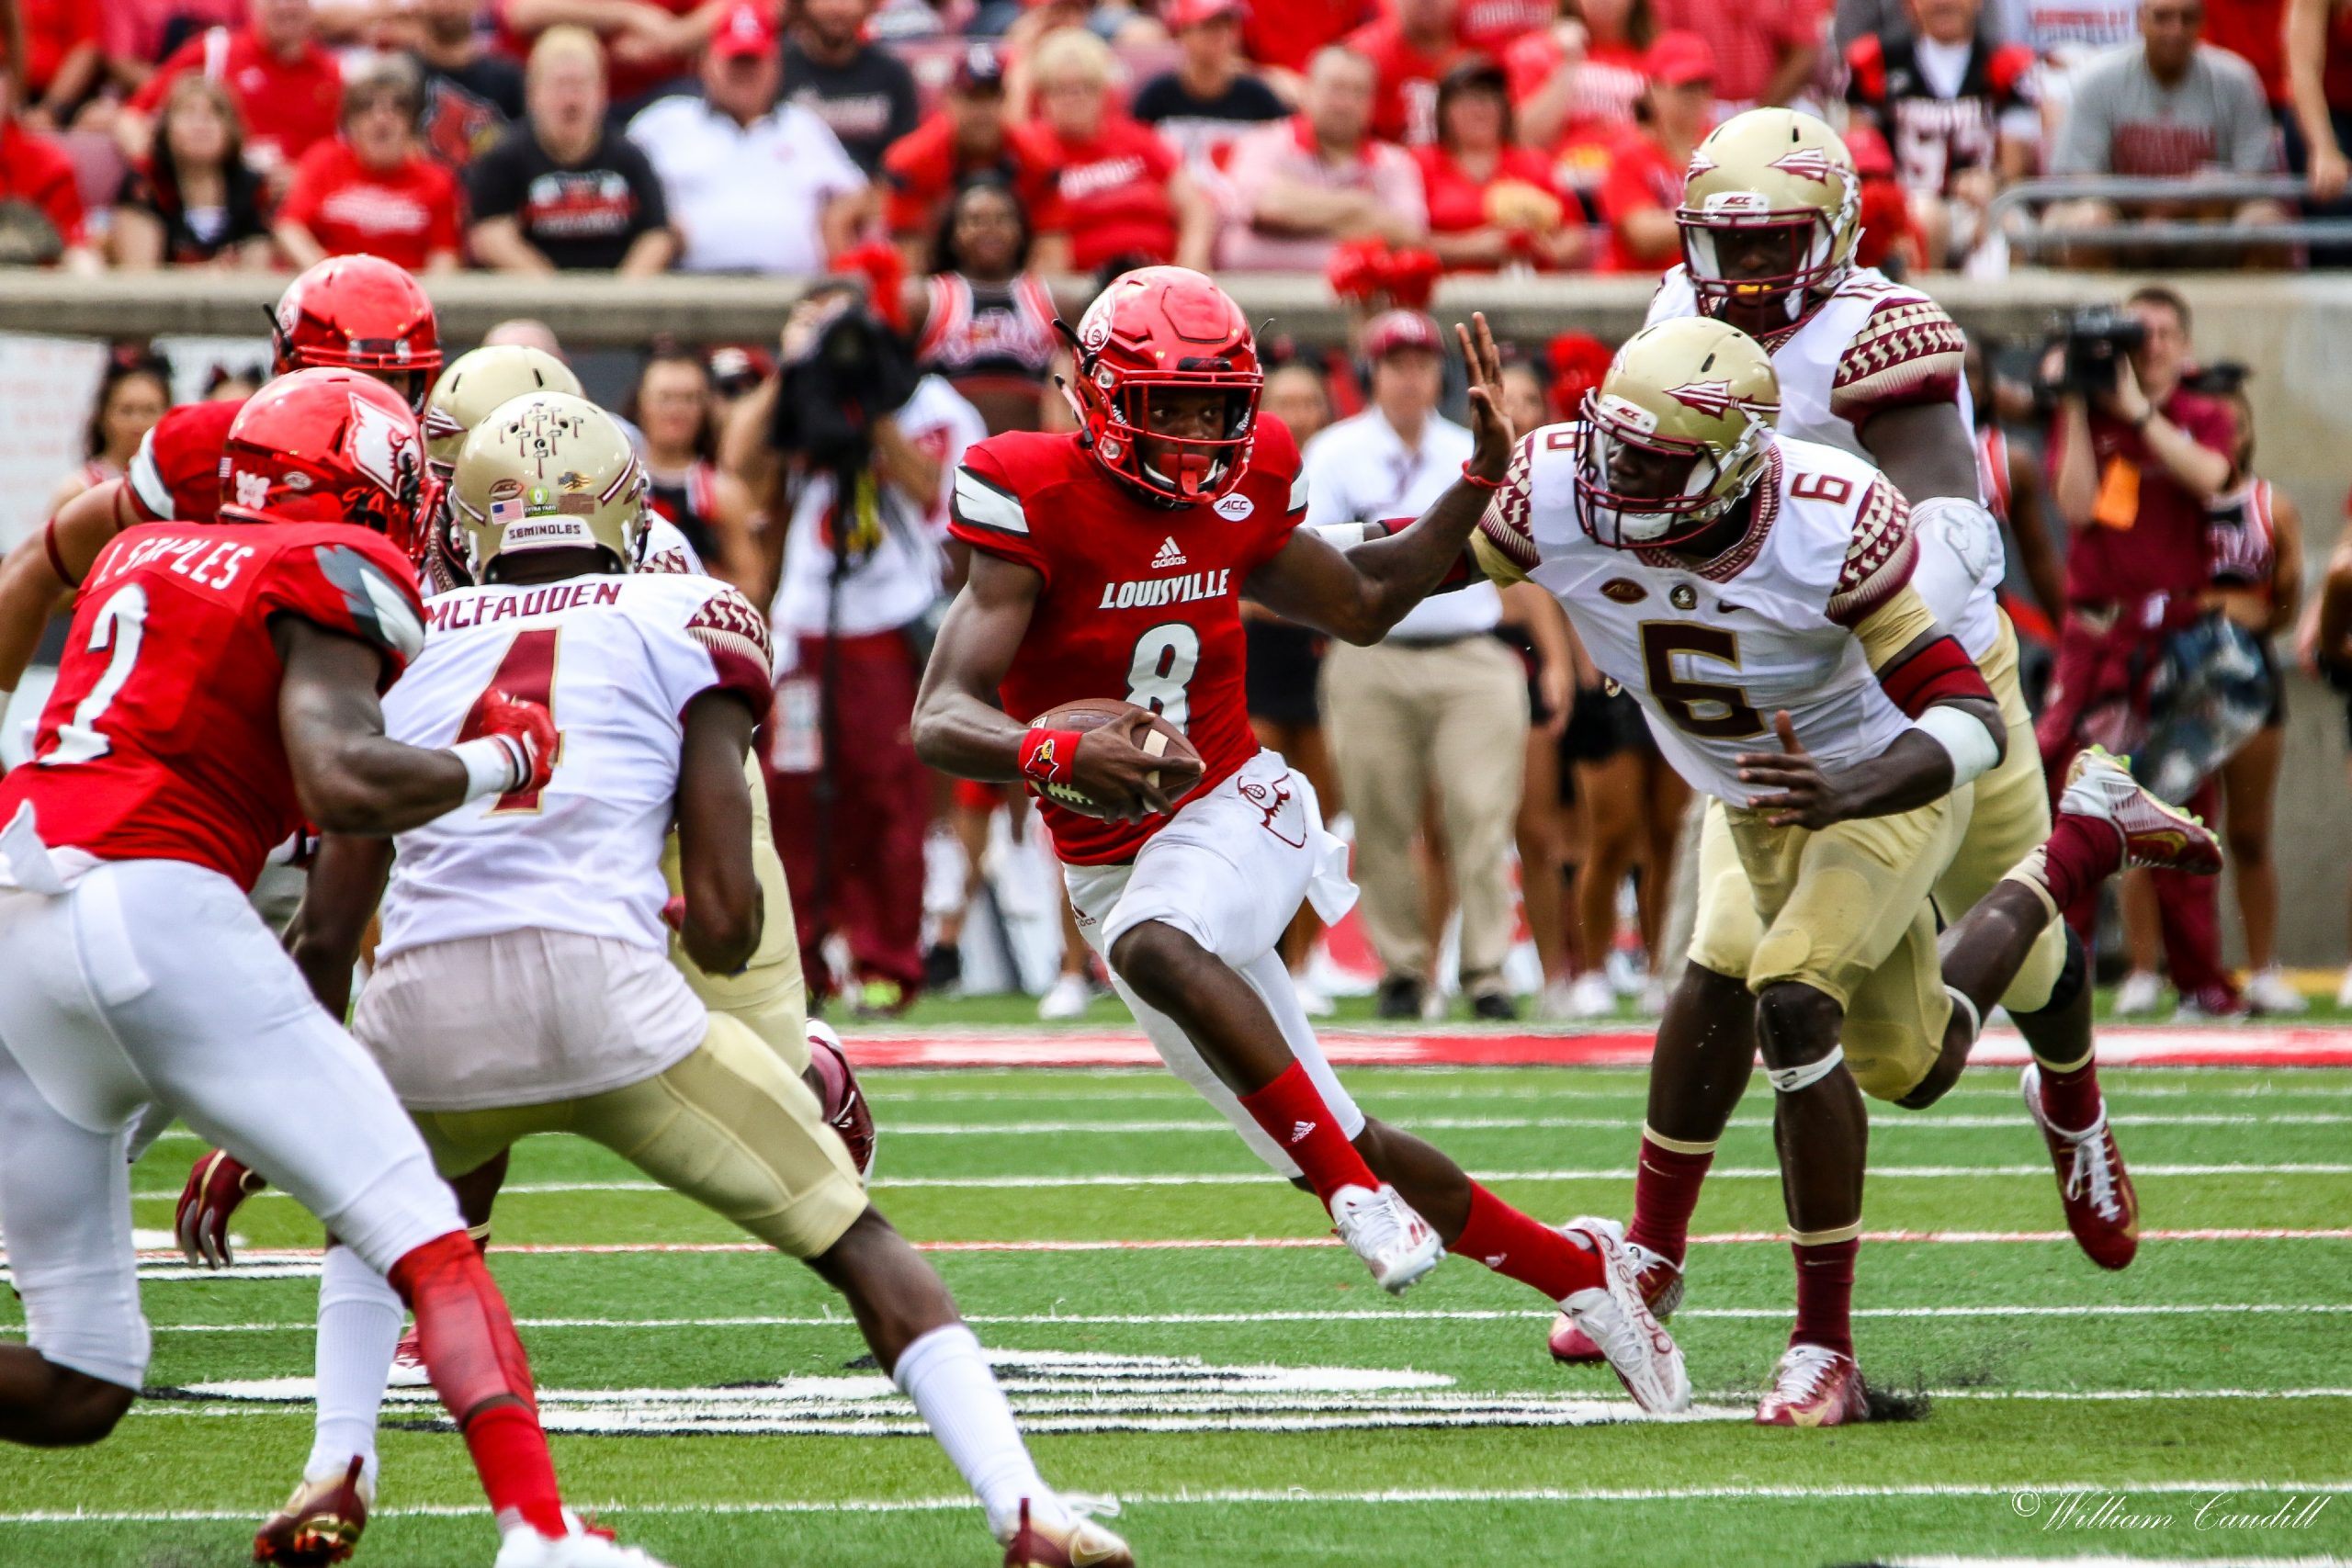 Louisville football at Florida State: Live updates, highlights